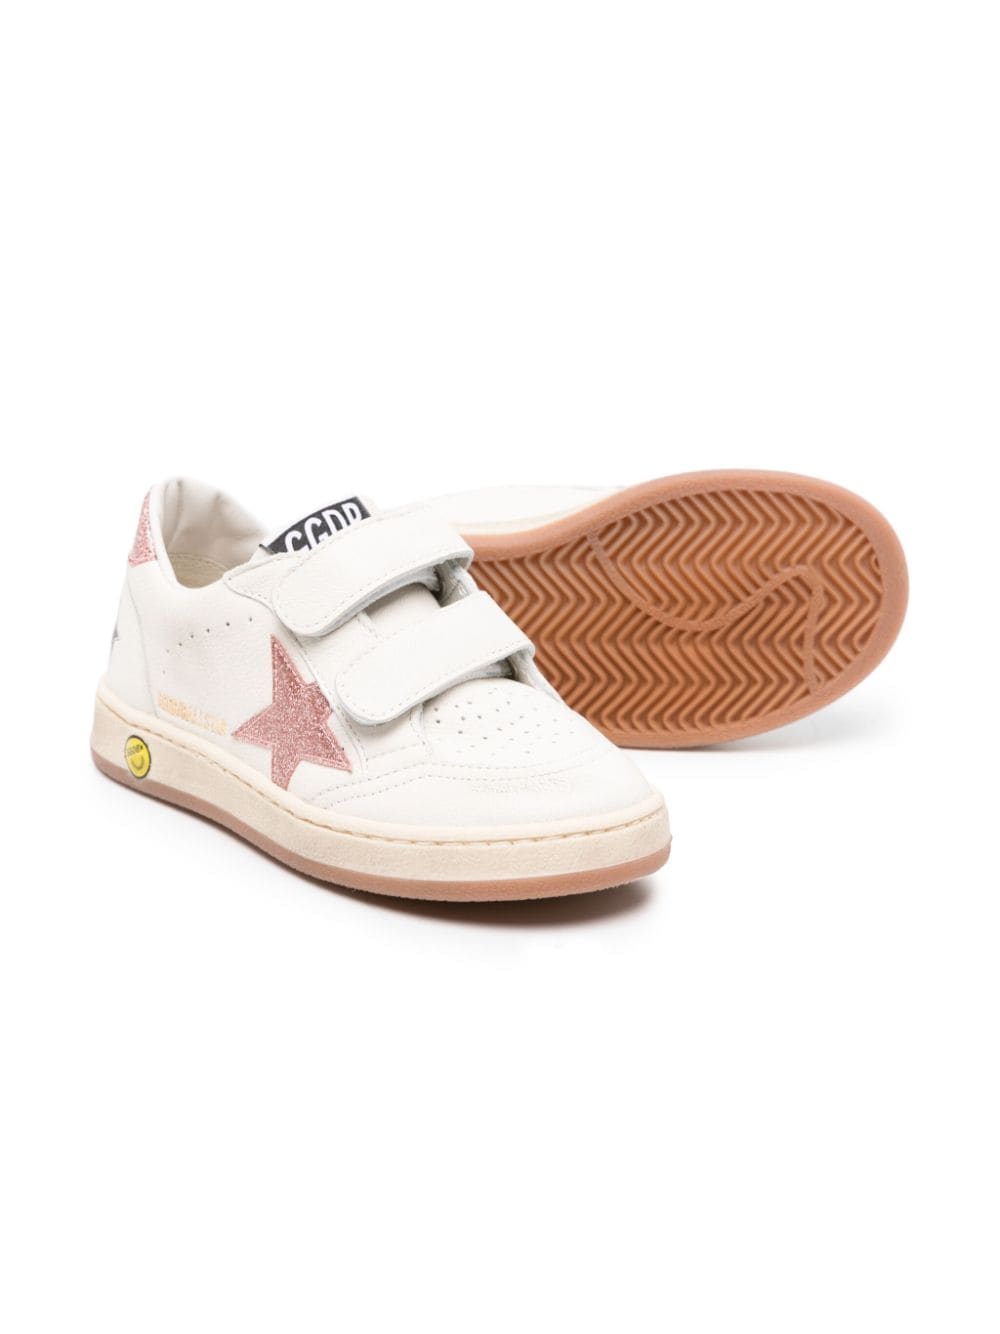 Image 2 of Golden Goose Kids Ball Star leather sneakers